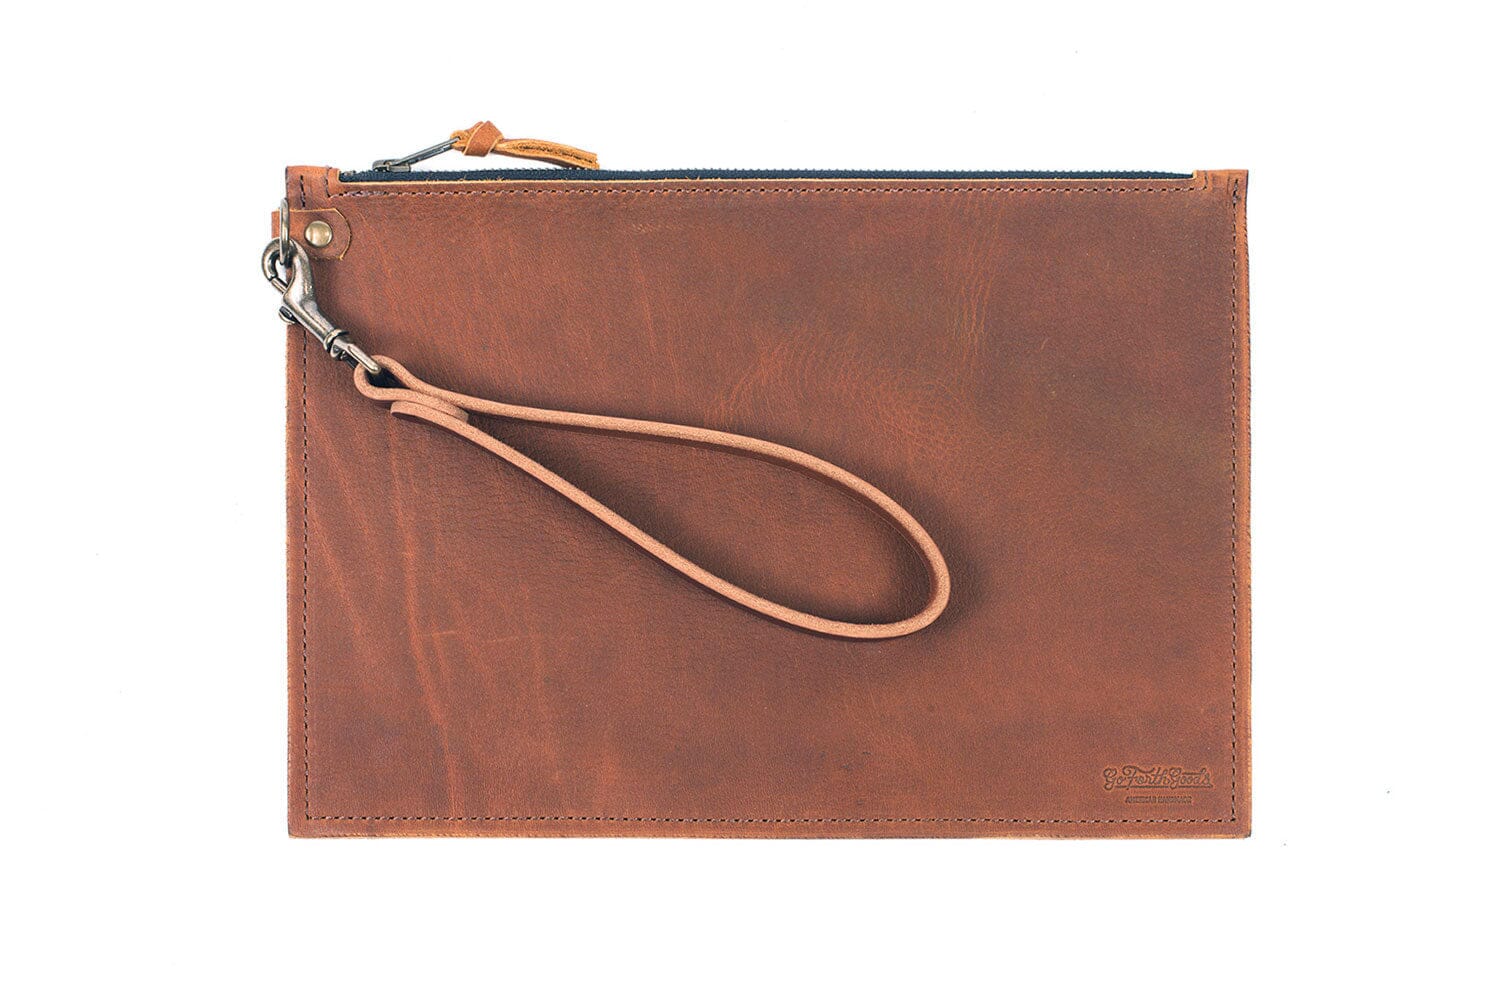 FELICITY ZIPPERED CLUTCH WITH WRISTLET LARGE - RUSTIC PECAN (READY TO SHIP)